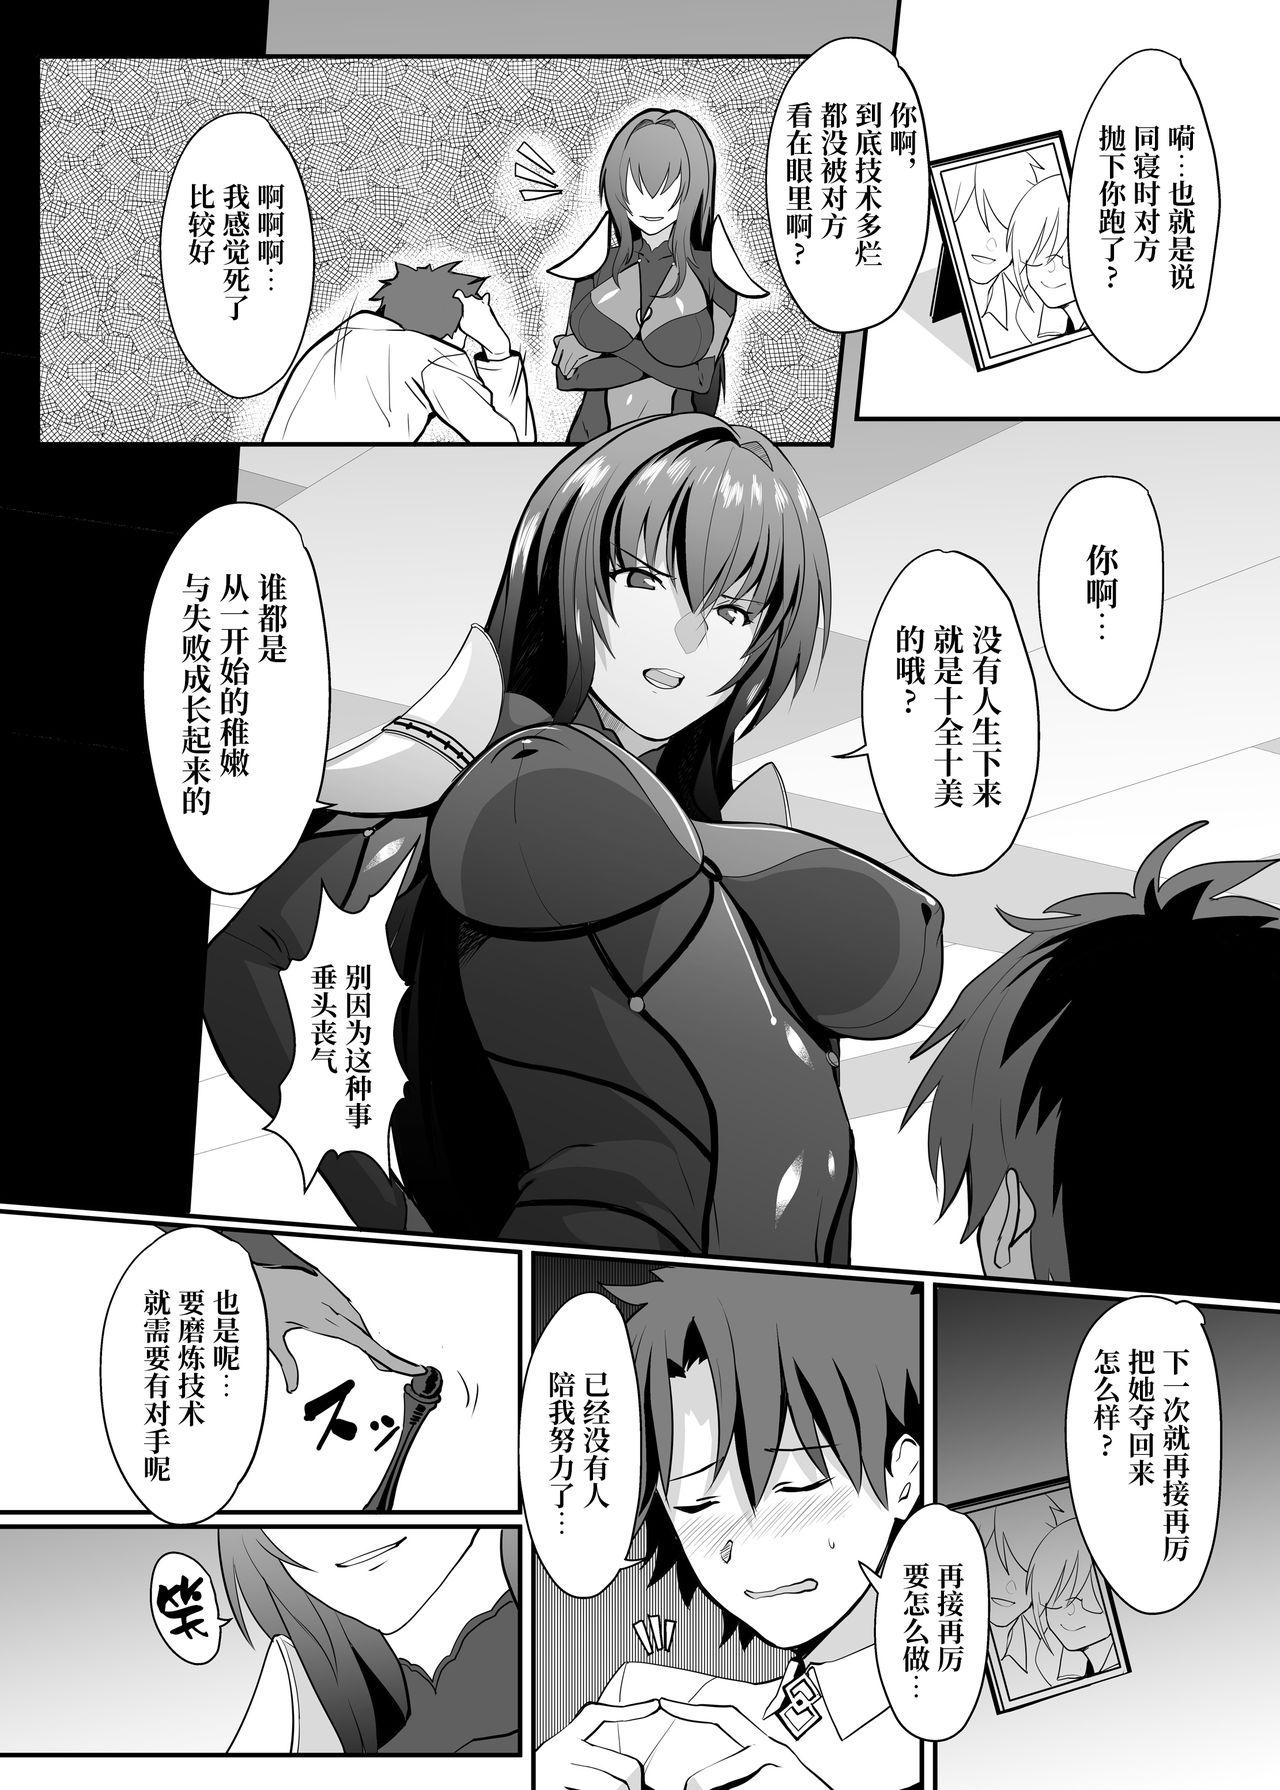 Brazilian Scathach Shishou no Dosukebe Lesson - Fate grand order Watersports - Page 4